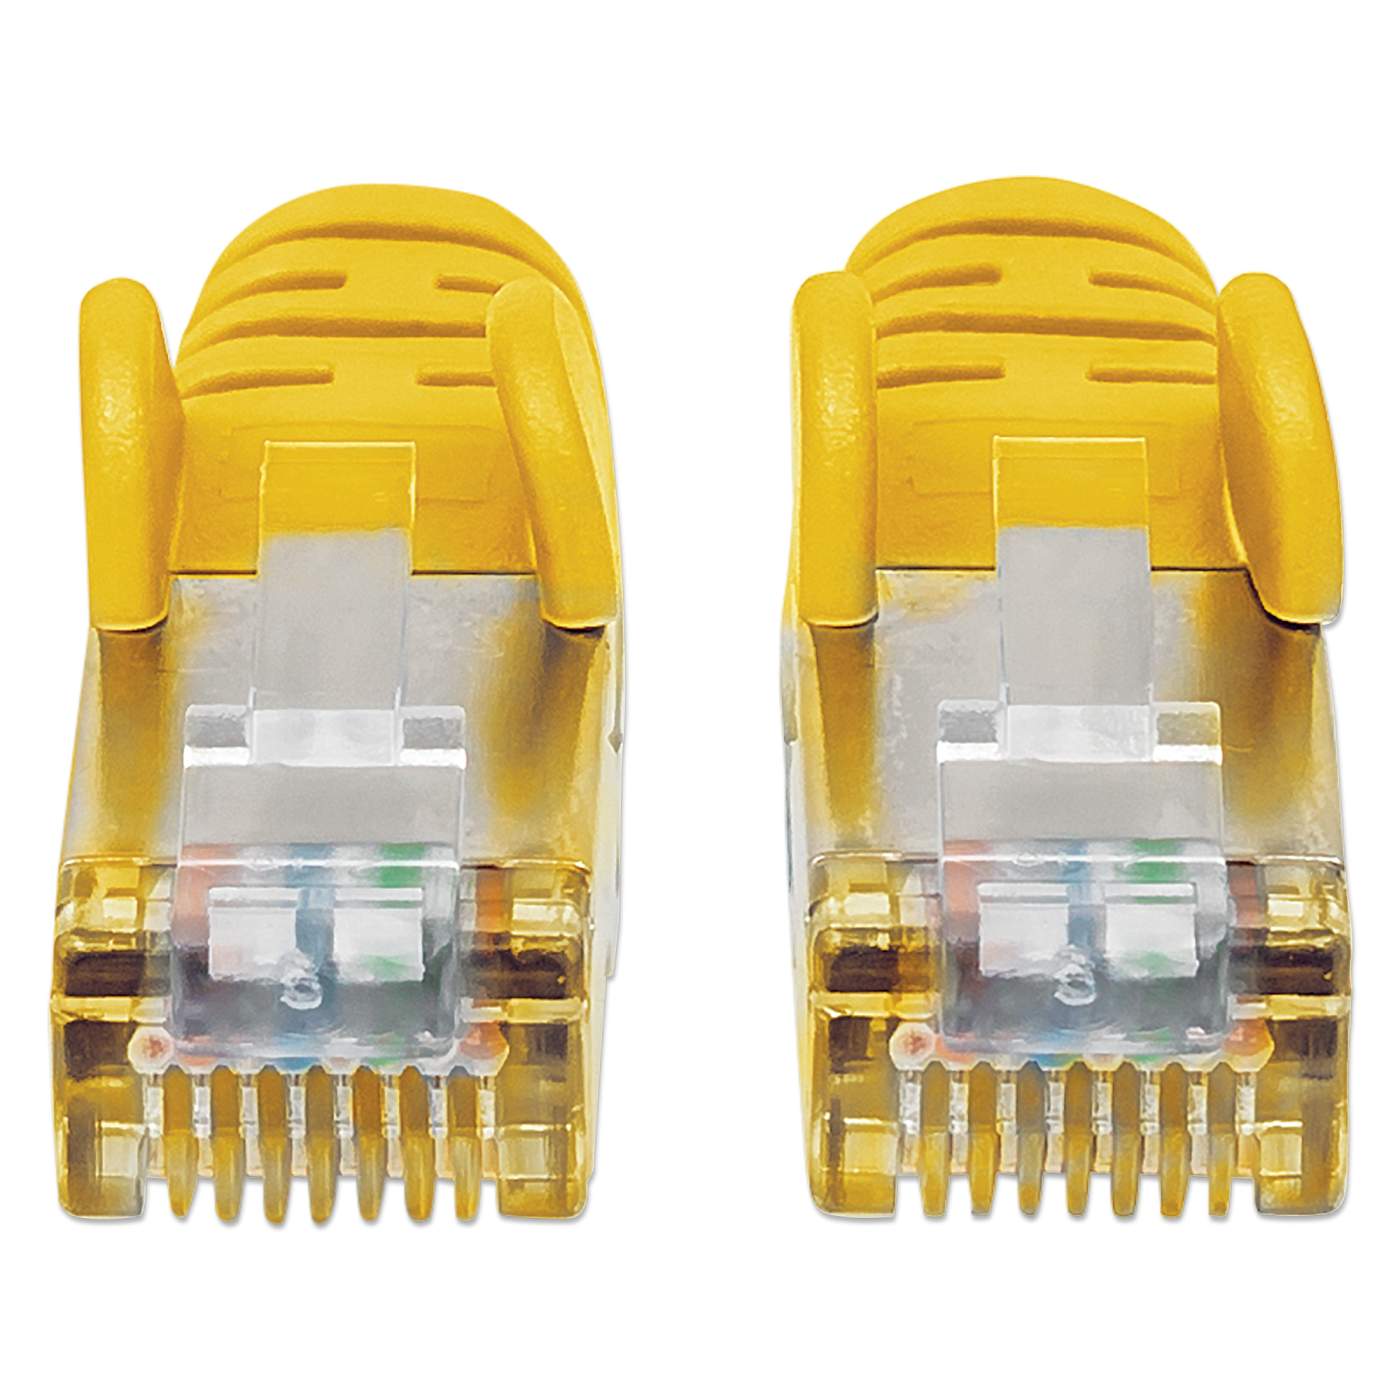 Cat6a S/FTP Network Patch Cable, 5 ft., Yellow Image 4